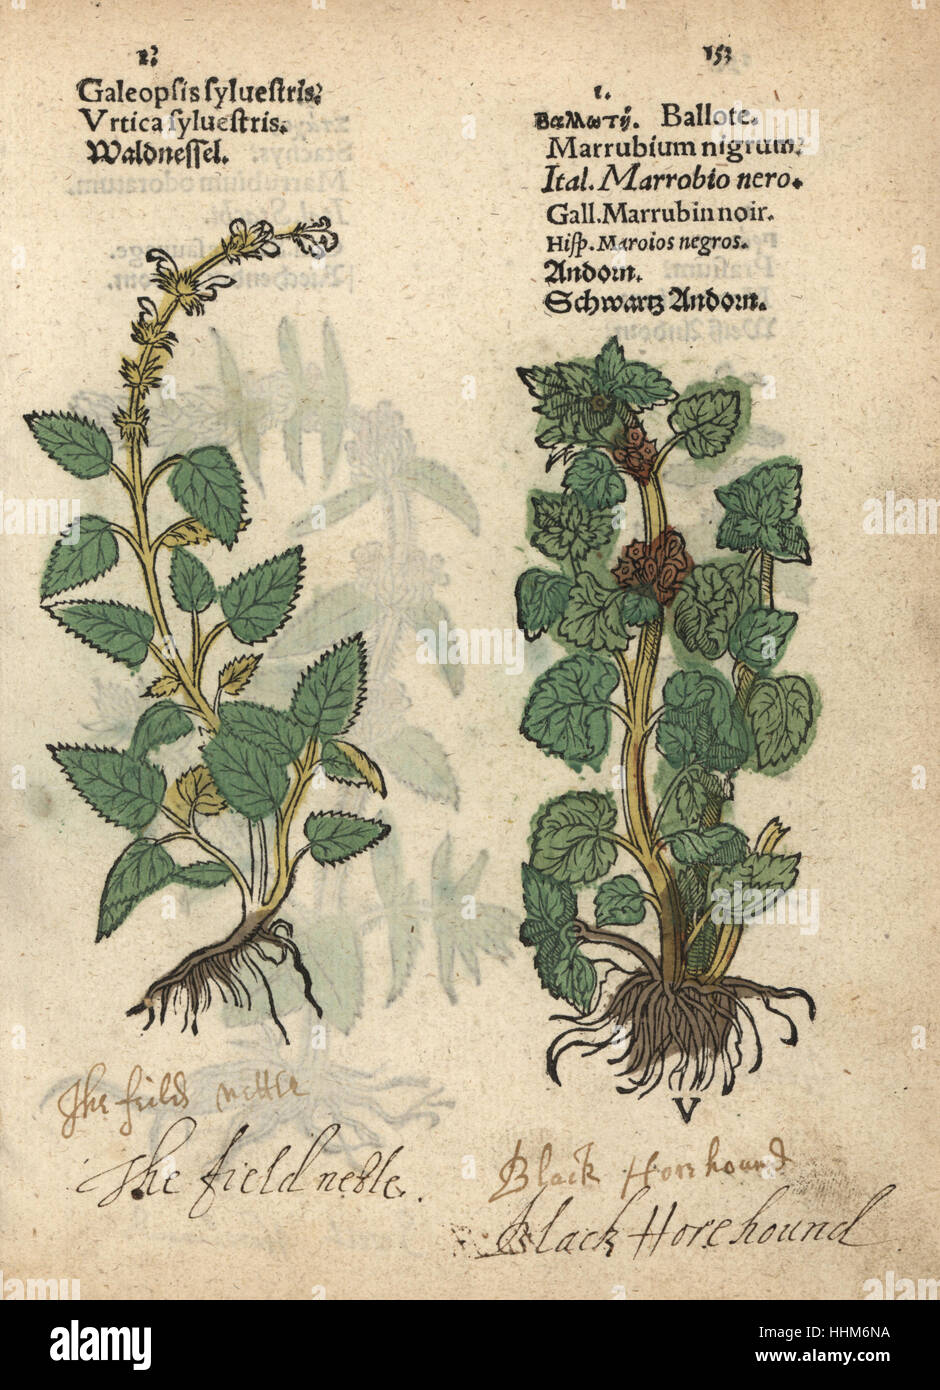 Common hemp nettle, Galeopsis tetrahit, and black horehound, Ballota nigra. Handcoloured woodblock engraving of a botanical illustration from Adam Lonicer's Krauterbuch, or Herbal, Frankfurt, 1557. This from a 17th century pirate edition or atlas of illustrations only, with captions in Latin, Greek, French, Italian, German, and in English manuscript. Stock Photo